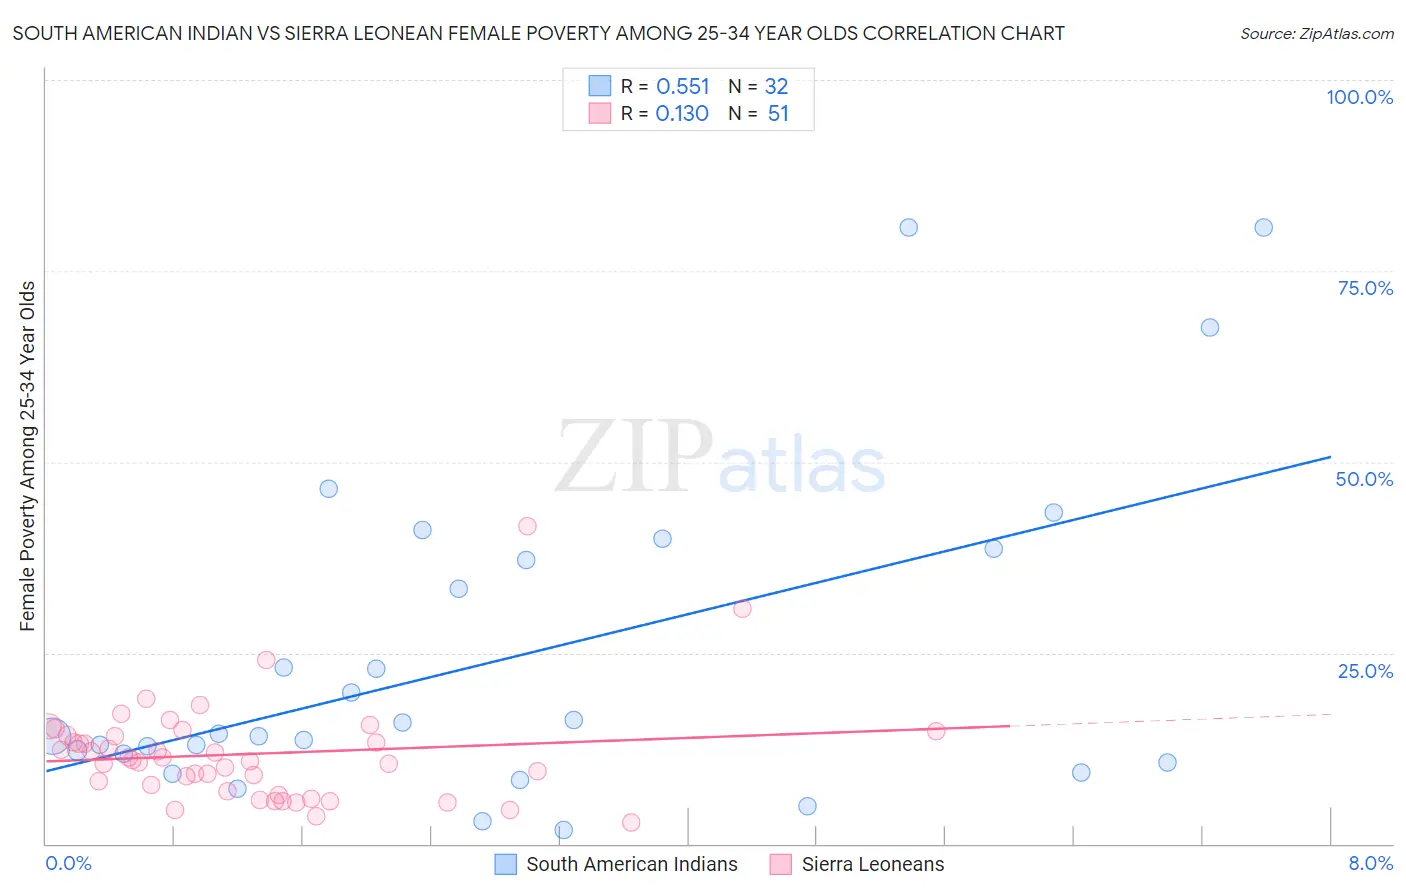 South American Indian vs Sierra Leonean Female Poverty Among 25-34 Year Olds